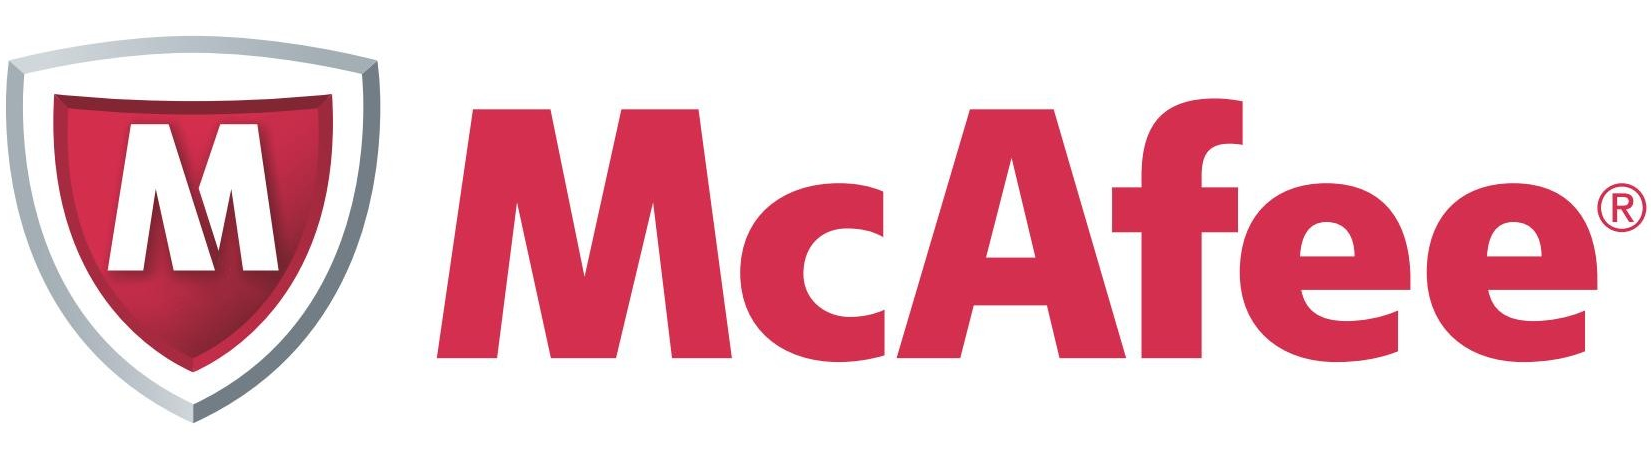 McAfee by Intel Hardware Support - Extended Service - 1 Year - Service